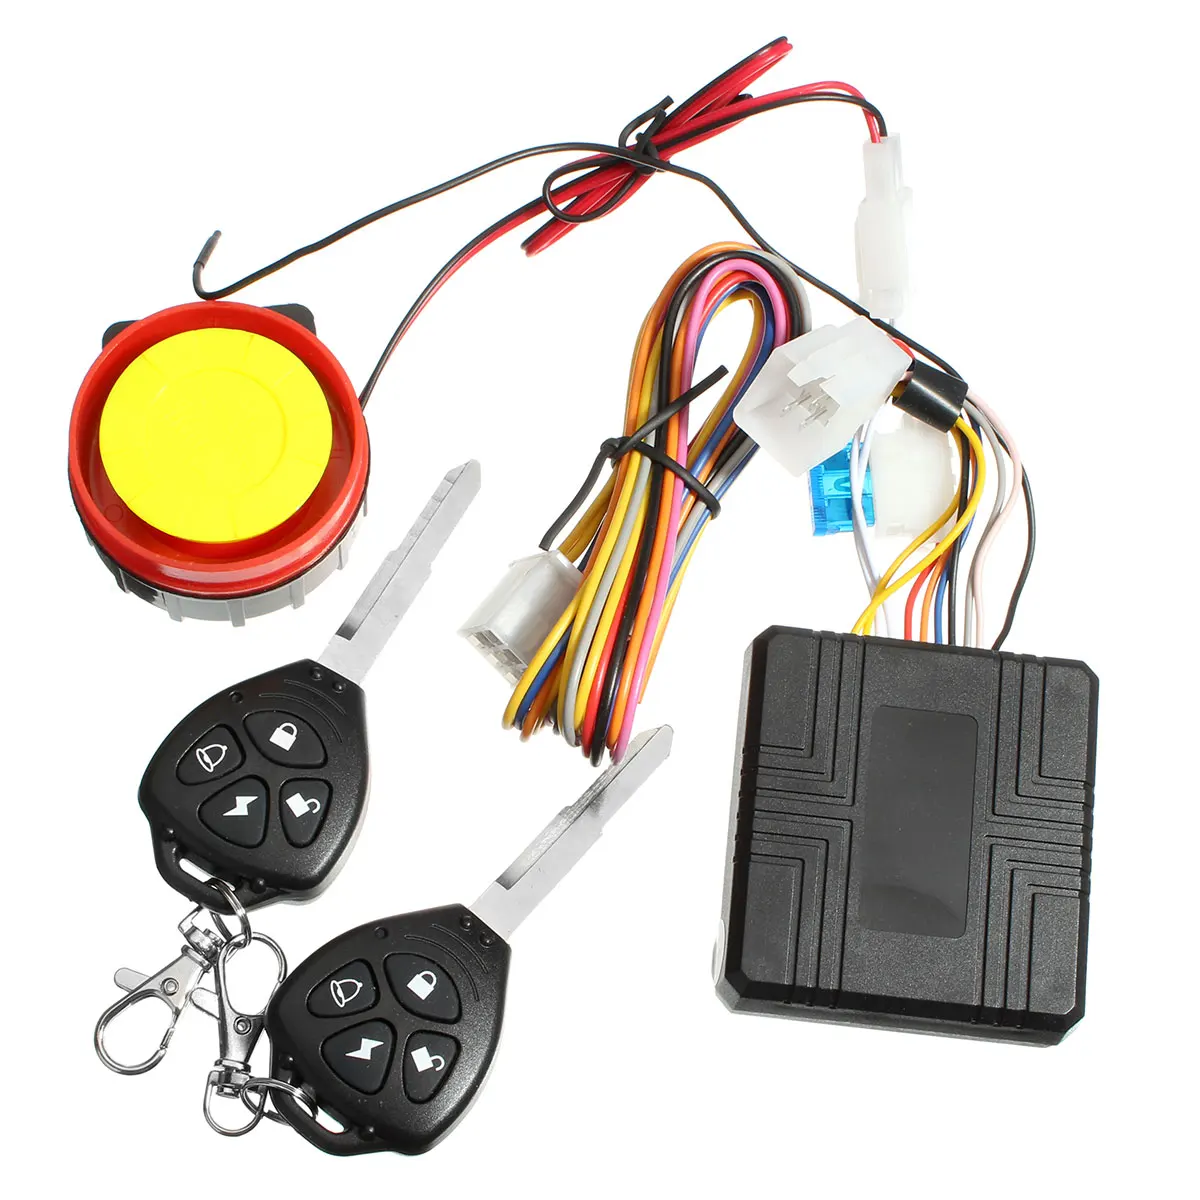 New One Set Motorcycle Theft Protection Remote Activation Motorbike Alarm Accessories With Remote Control+ Key